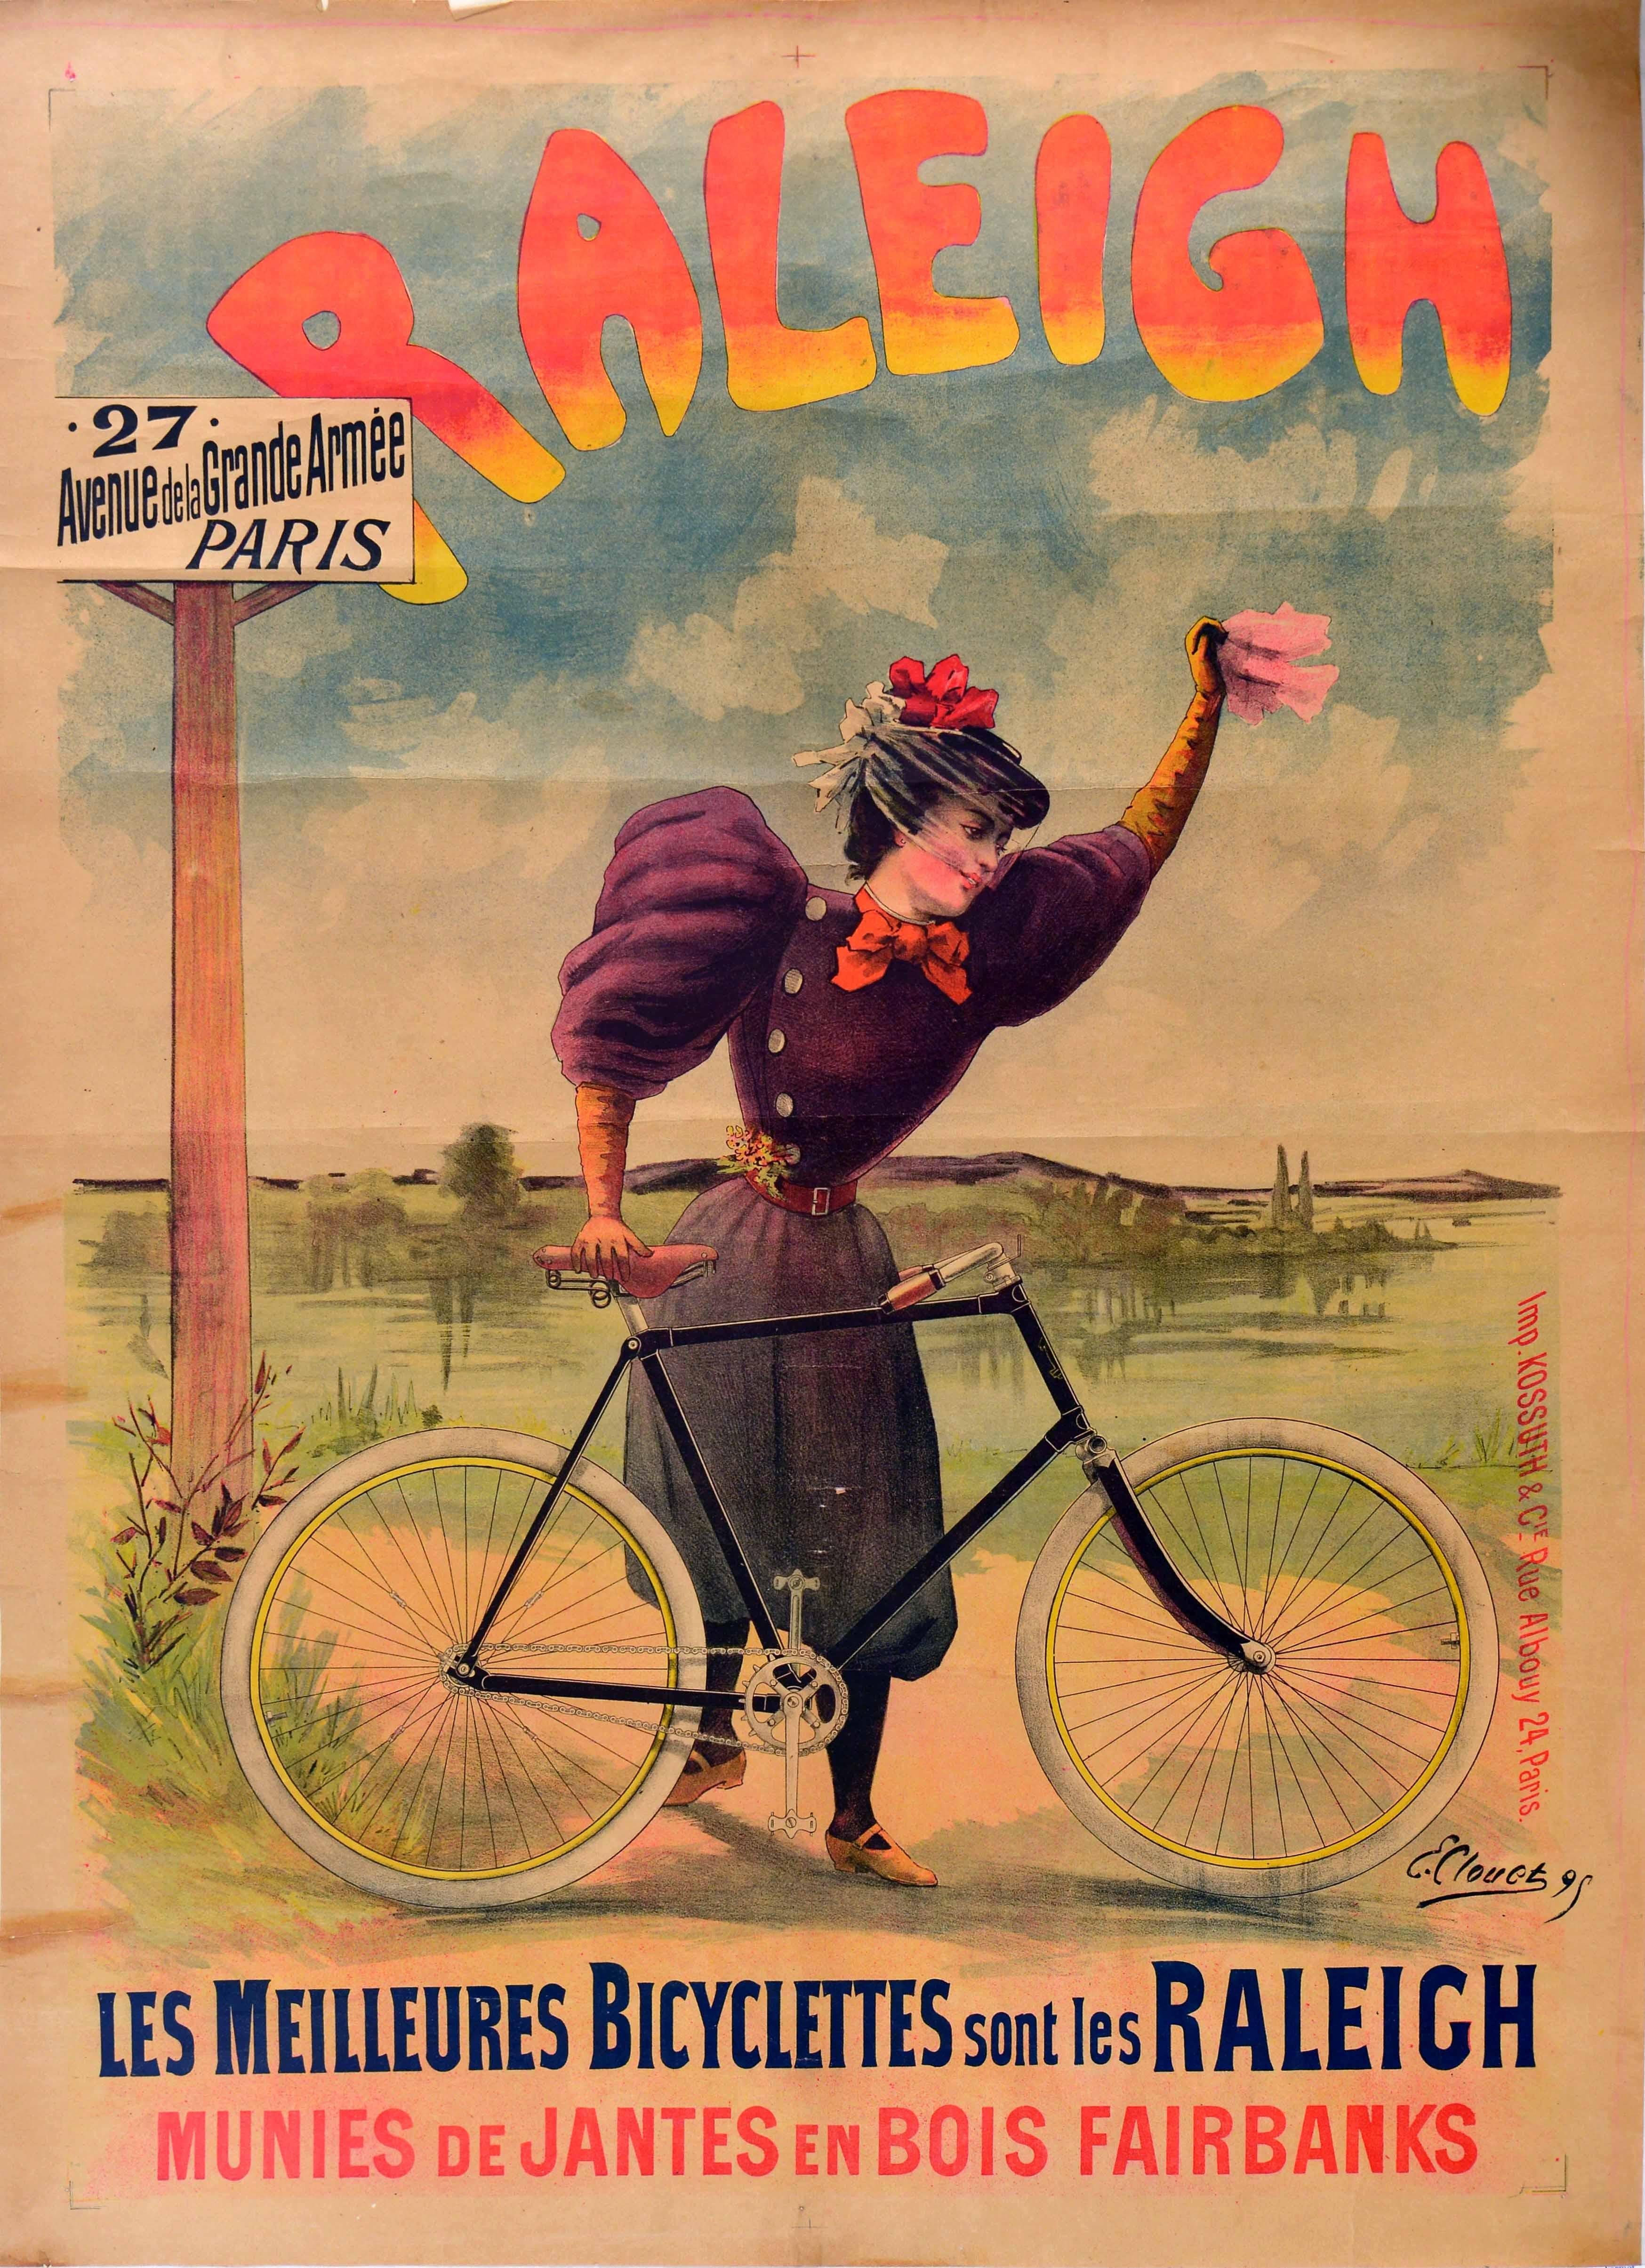 Emile Clouet Print - Original Antique Poster Raleigh Bicycles Meilleures Bicyclettes Cycles Bike Art